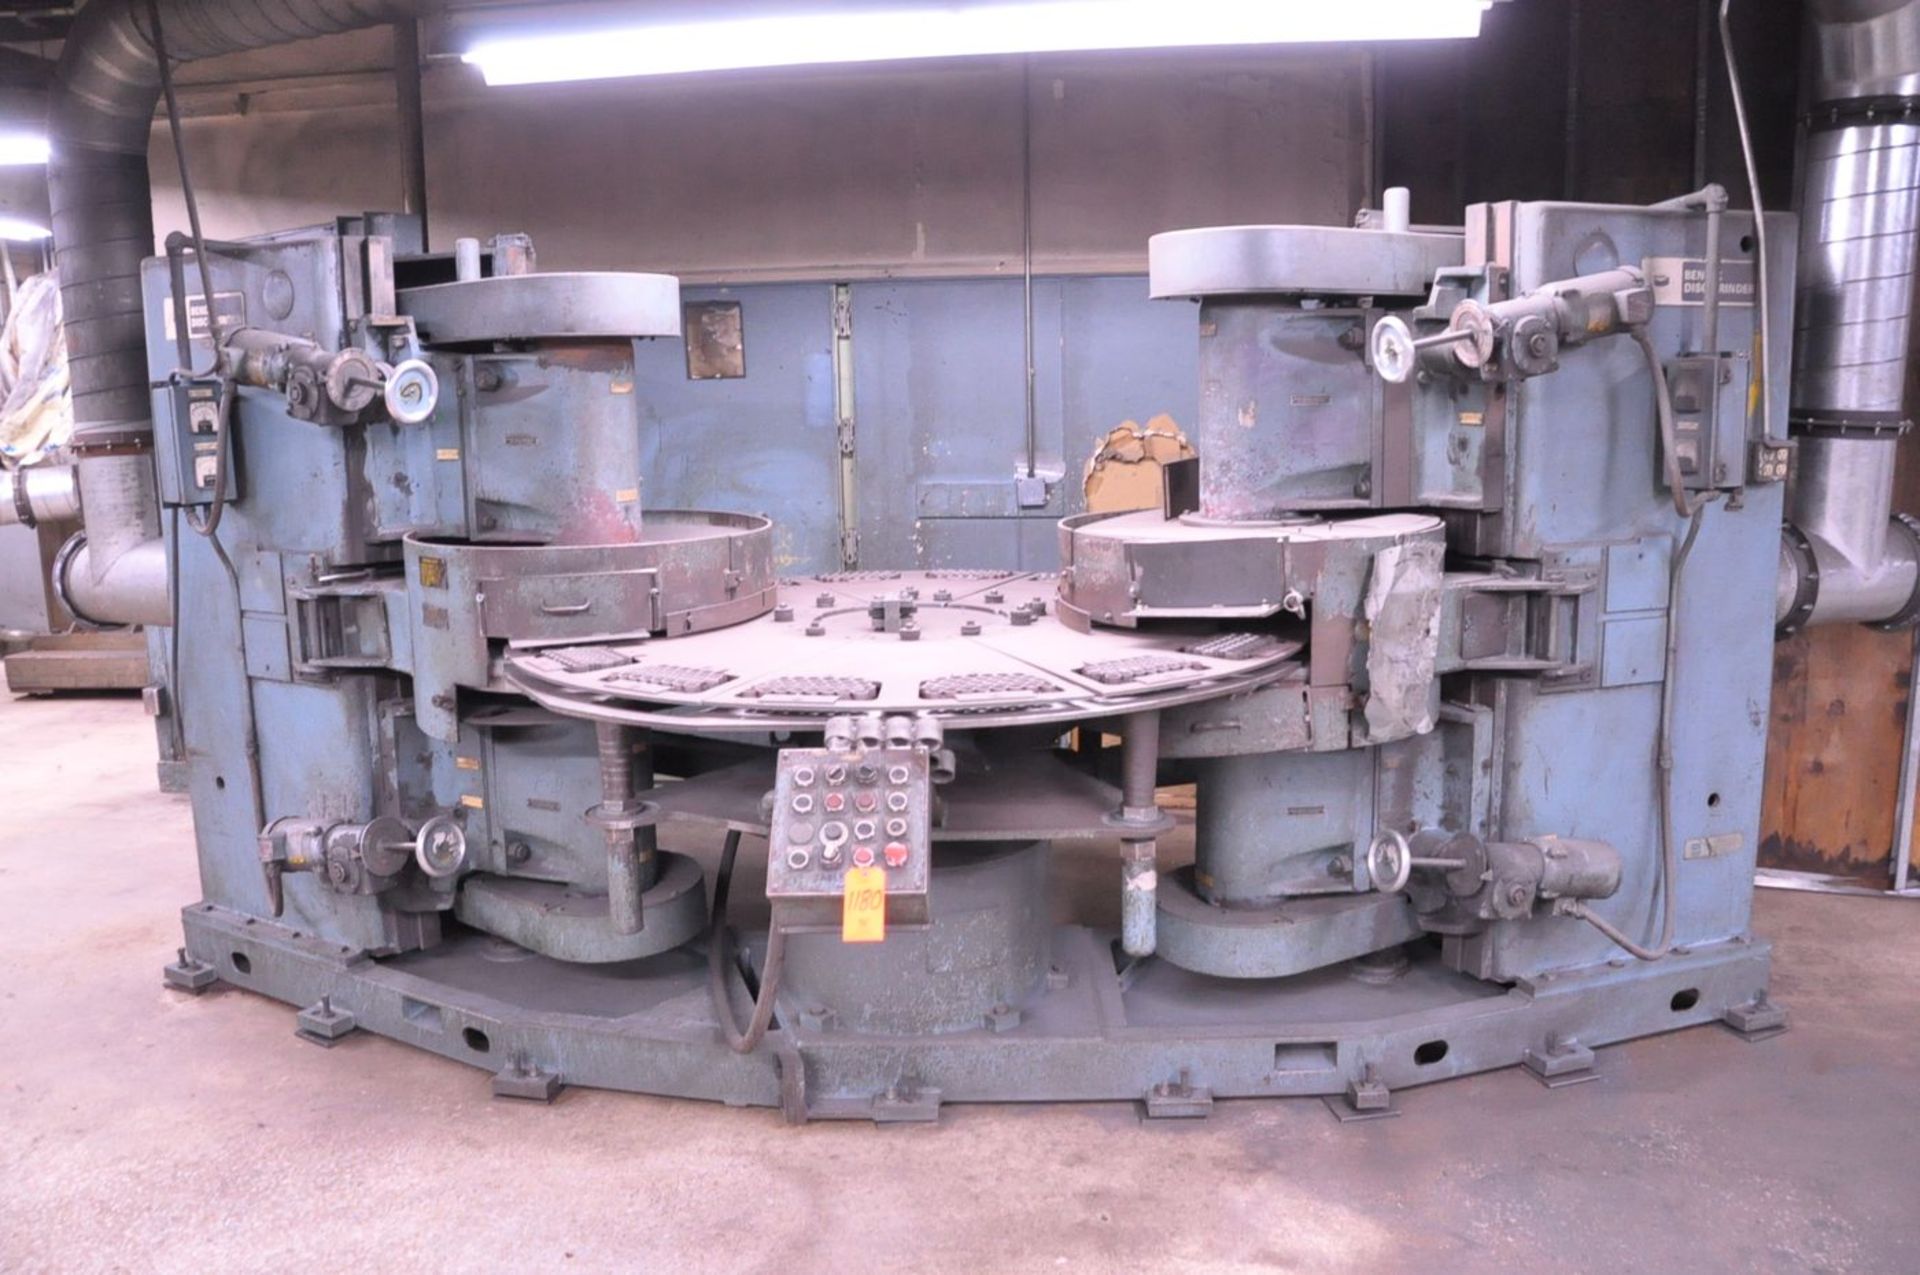 Besly 36 in. Model 918-36 Tandem Spring Grinder, S/N: 918-36-78T-189; with Dressers, Power Heads,